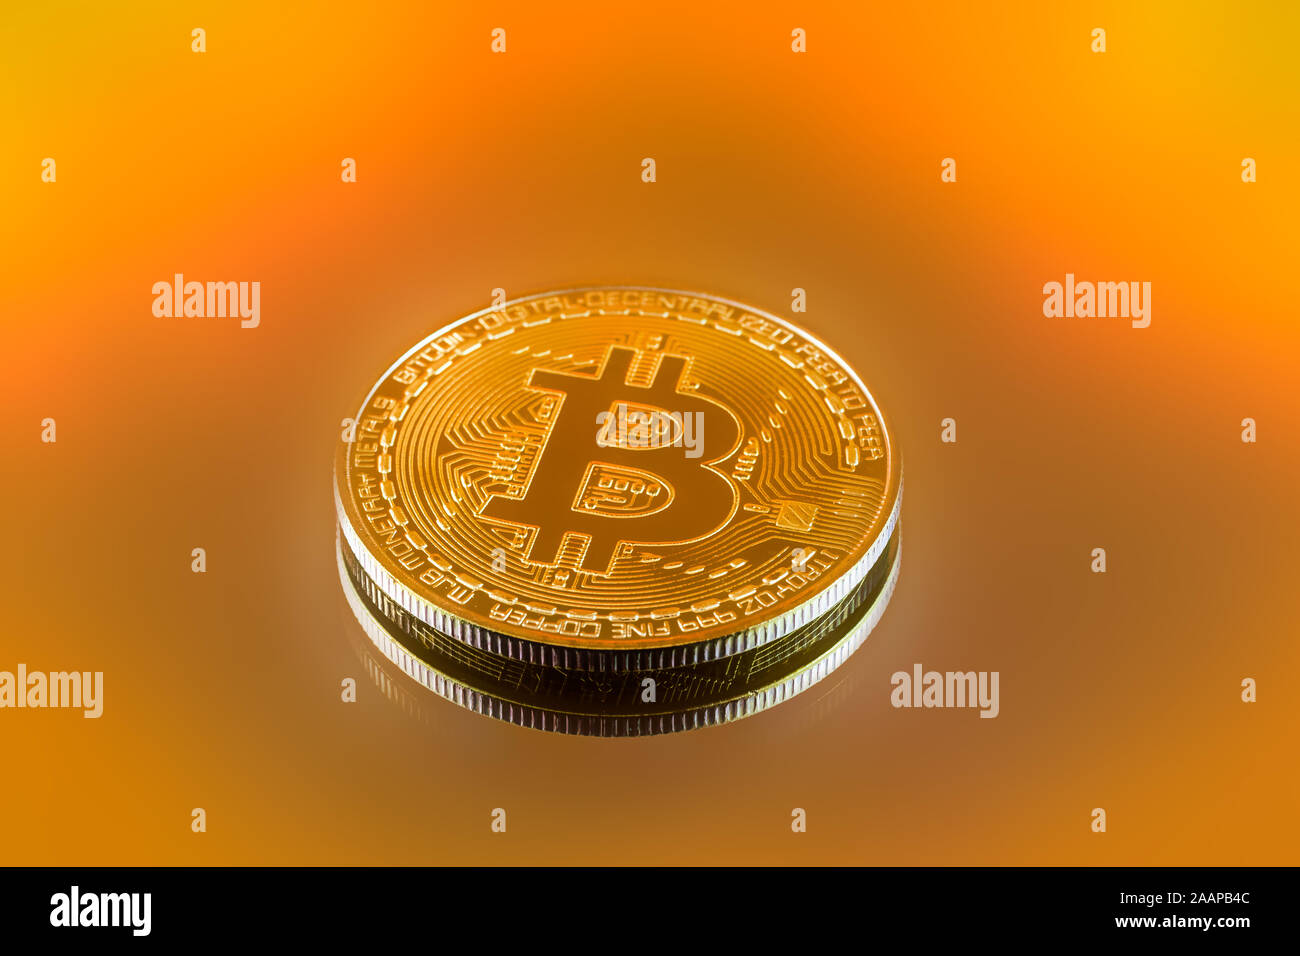 Gold color physical Bitcoin crypto currency in bright light with yellow brown background Stock Photo